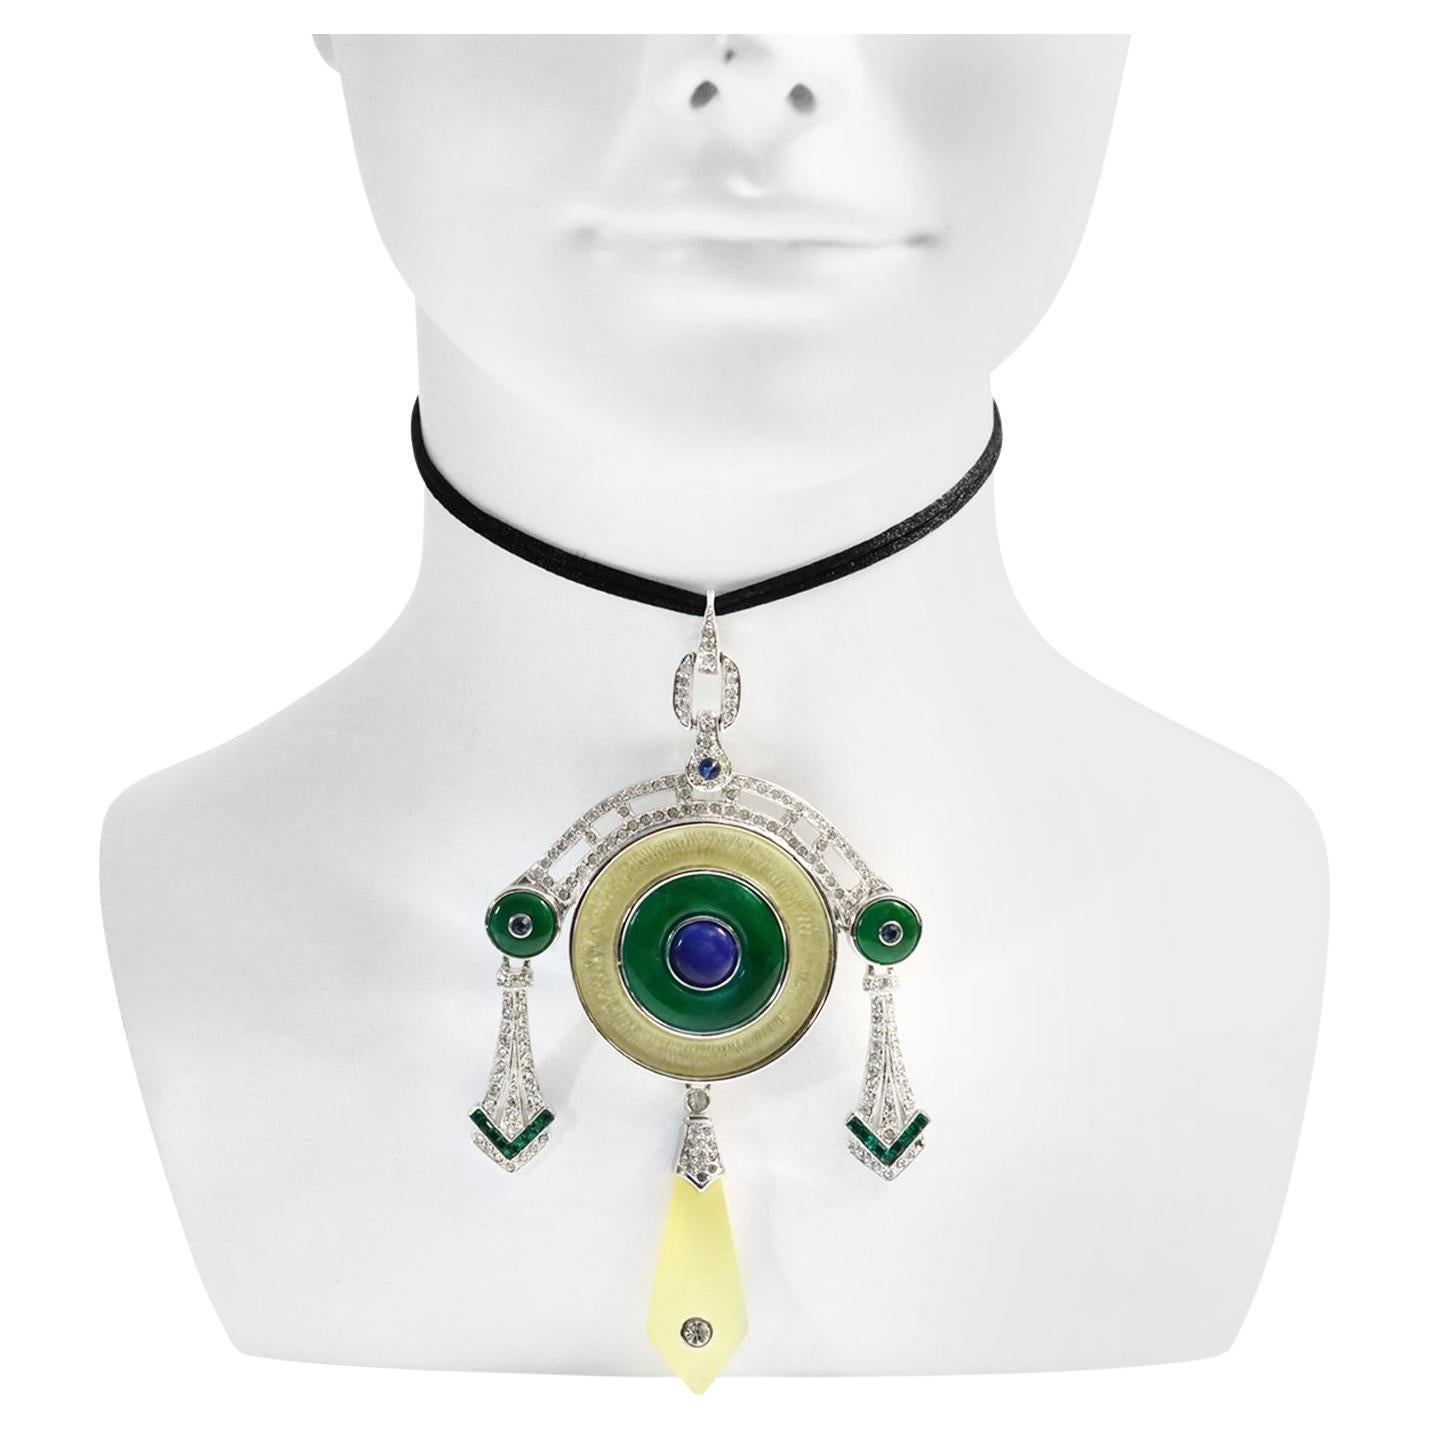 Vintage Art Deco Dangling Enamel and Diamante Pendant. Based on a Cartier Design from the 1920s. Has green and yellow enamel with dangling green crystal and diamante pieces.   This is on a black silk cord but the wearer could always change to a